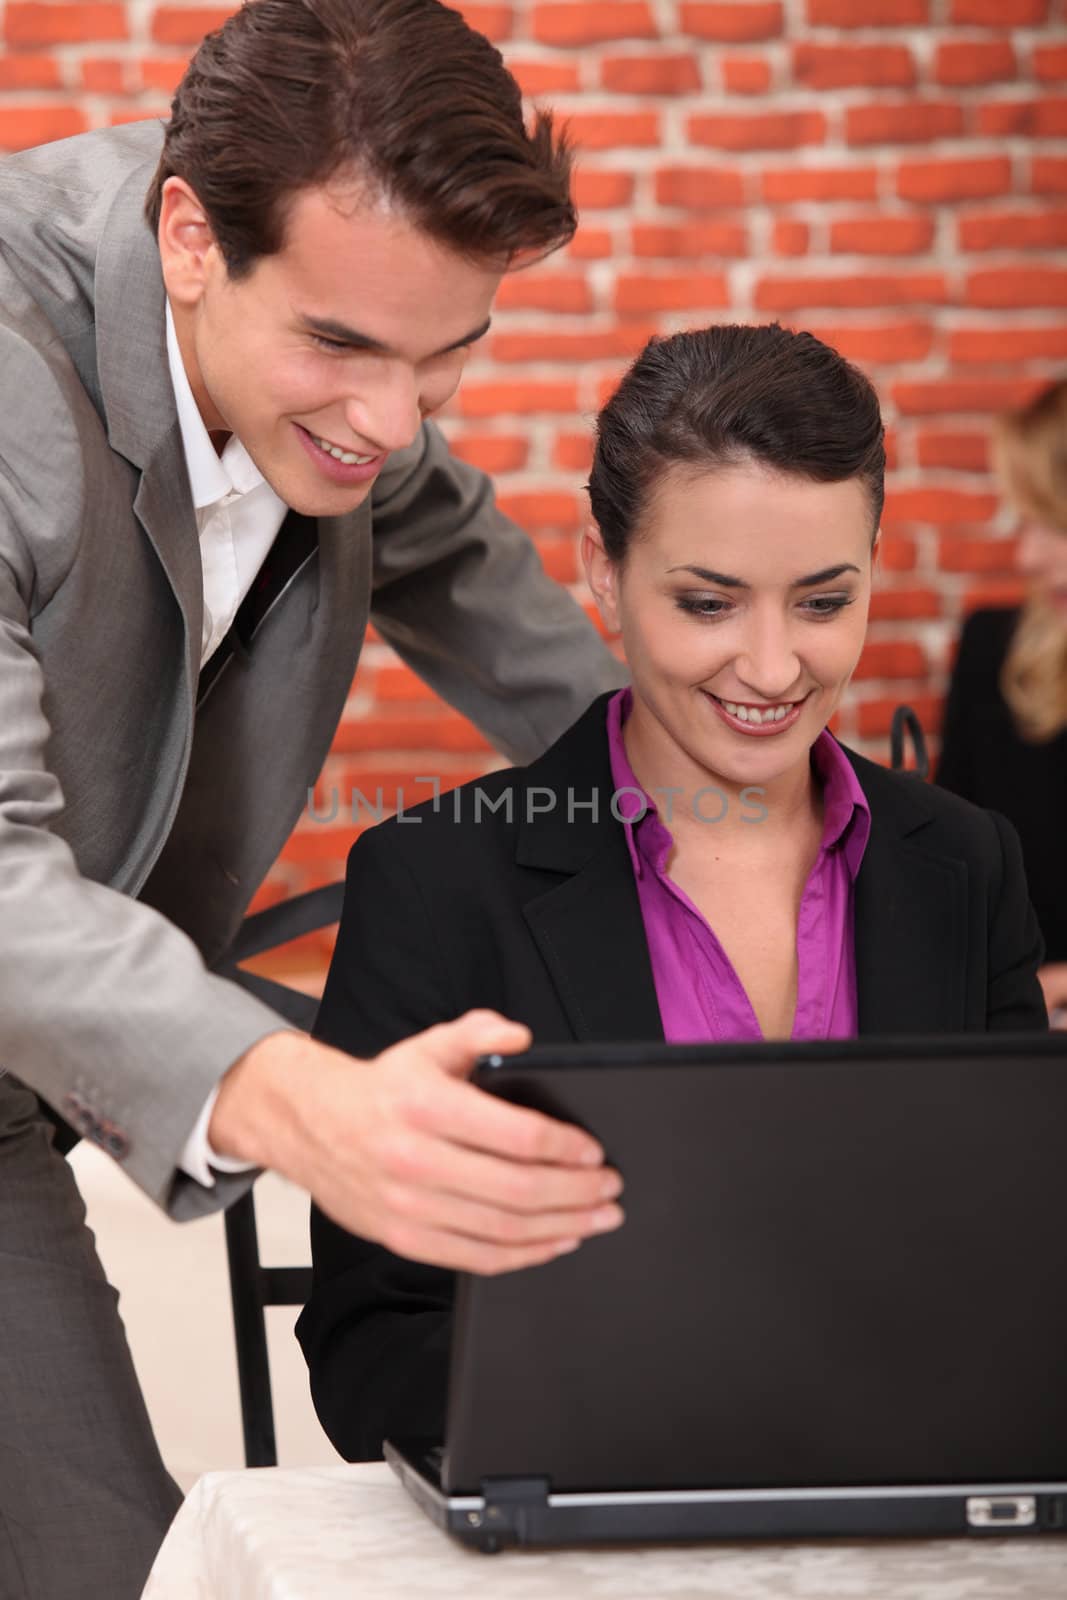 Young businesspeople looking at a laptop